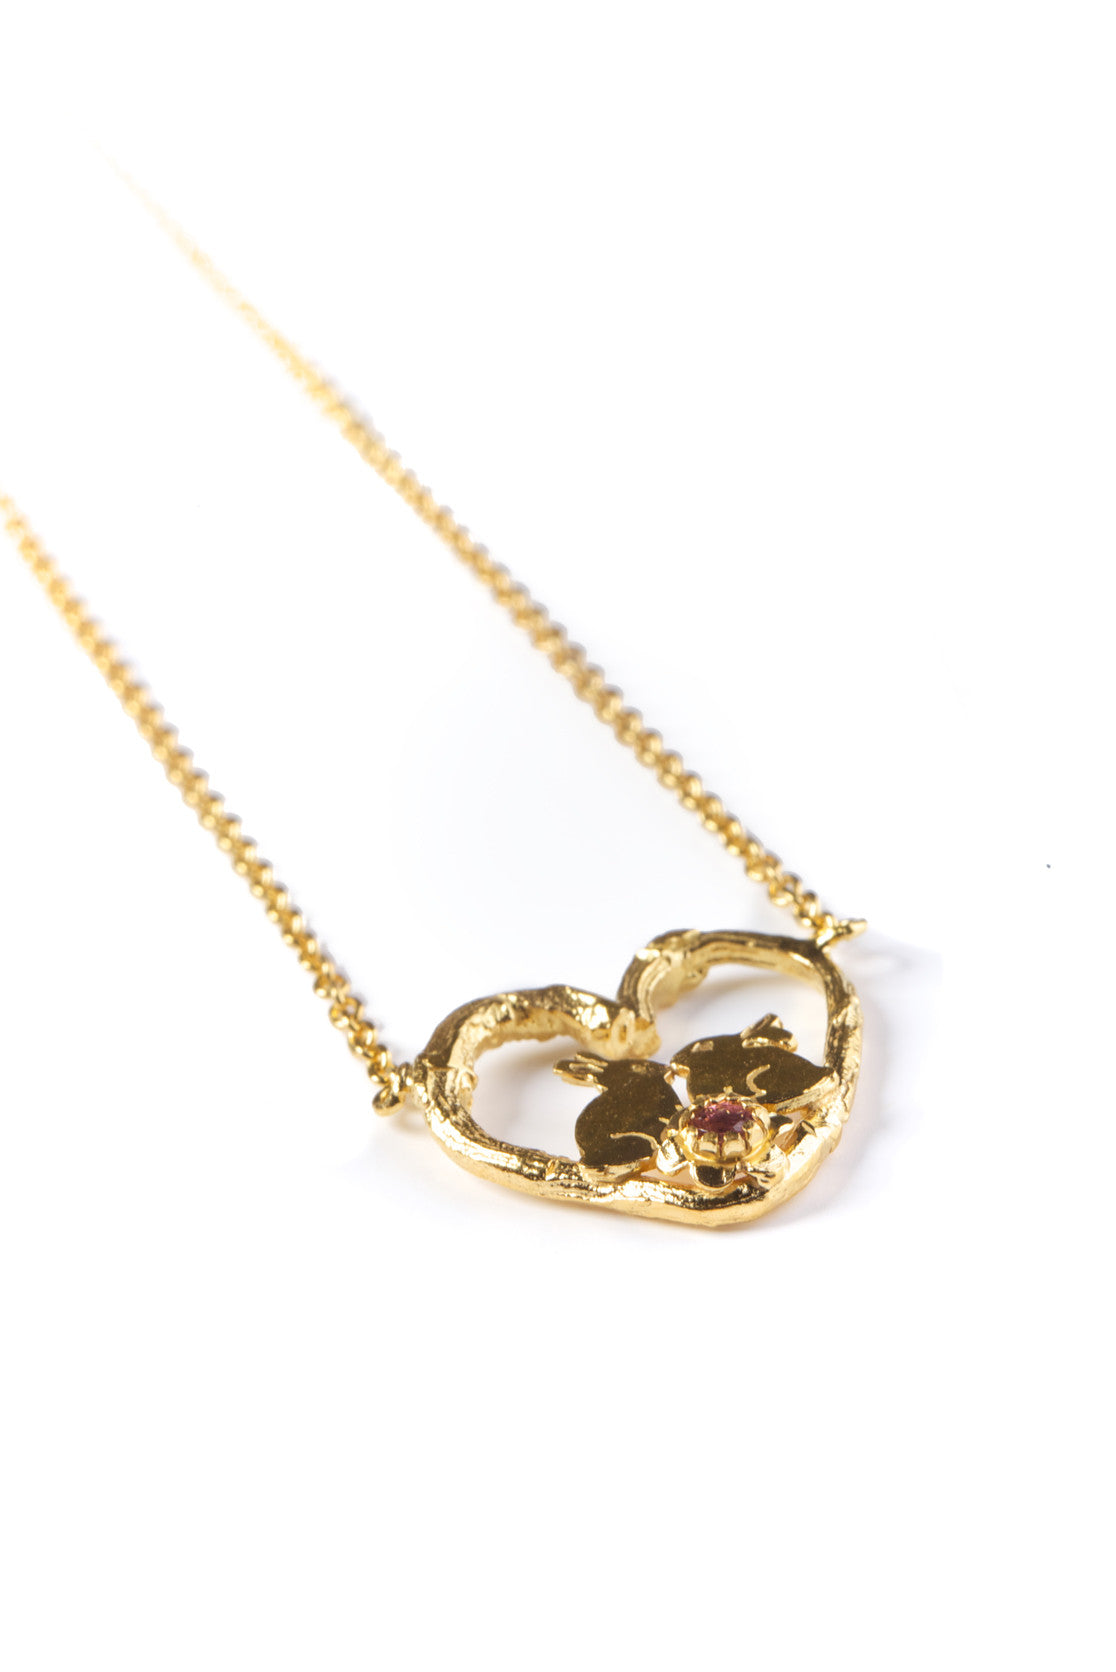 Kissing Bunny Rabbits In A Heart Necklace